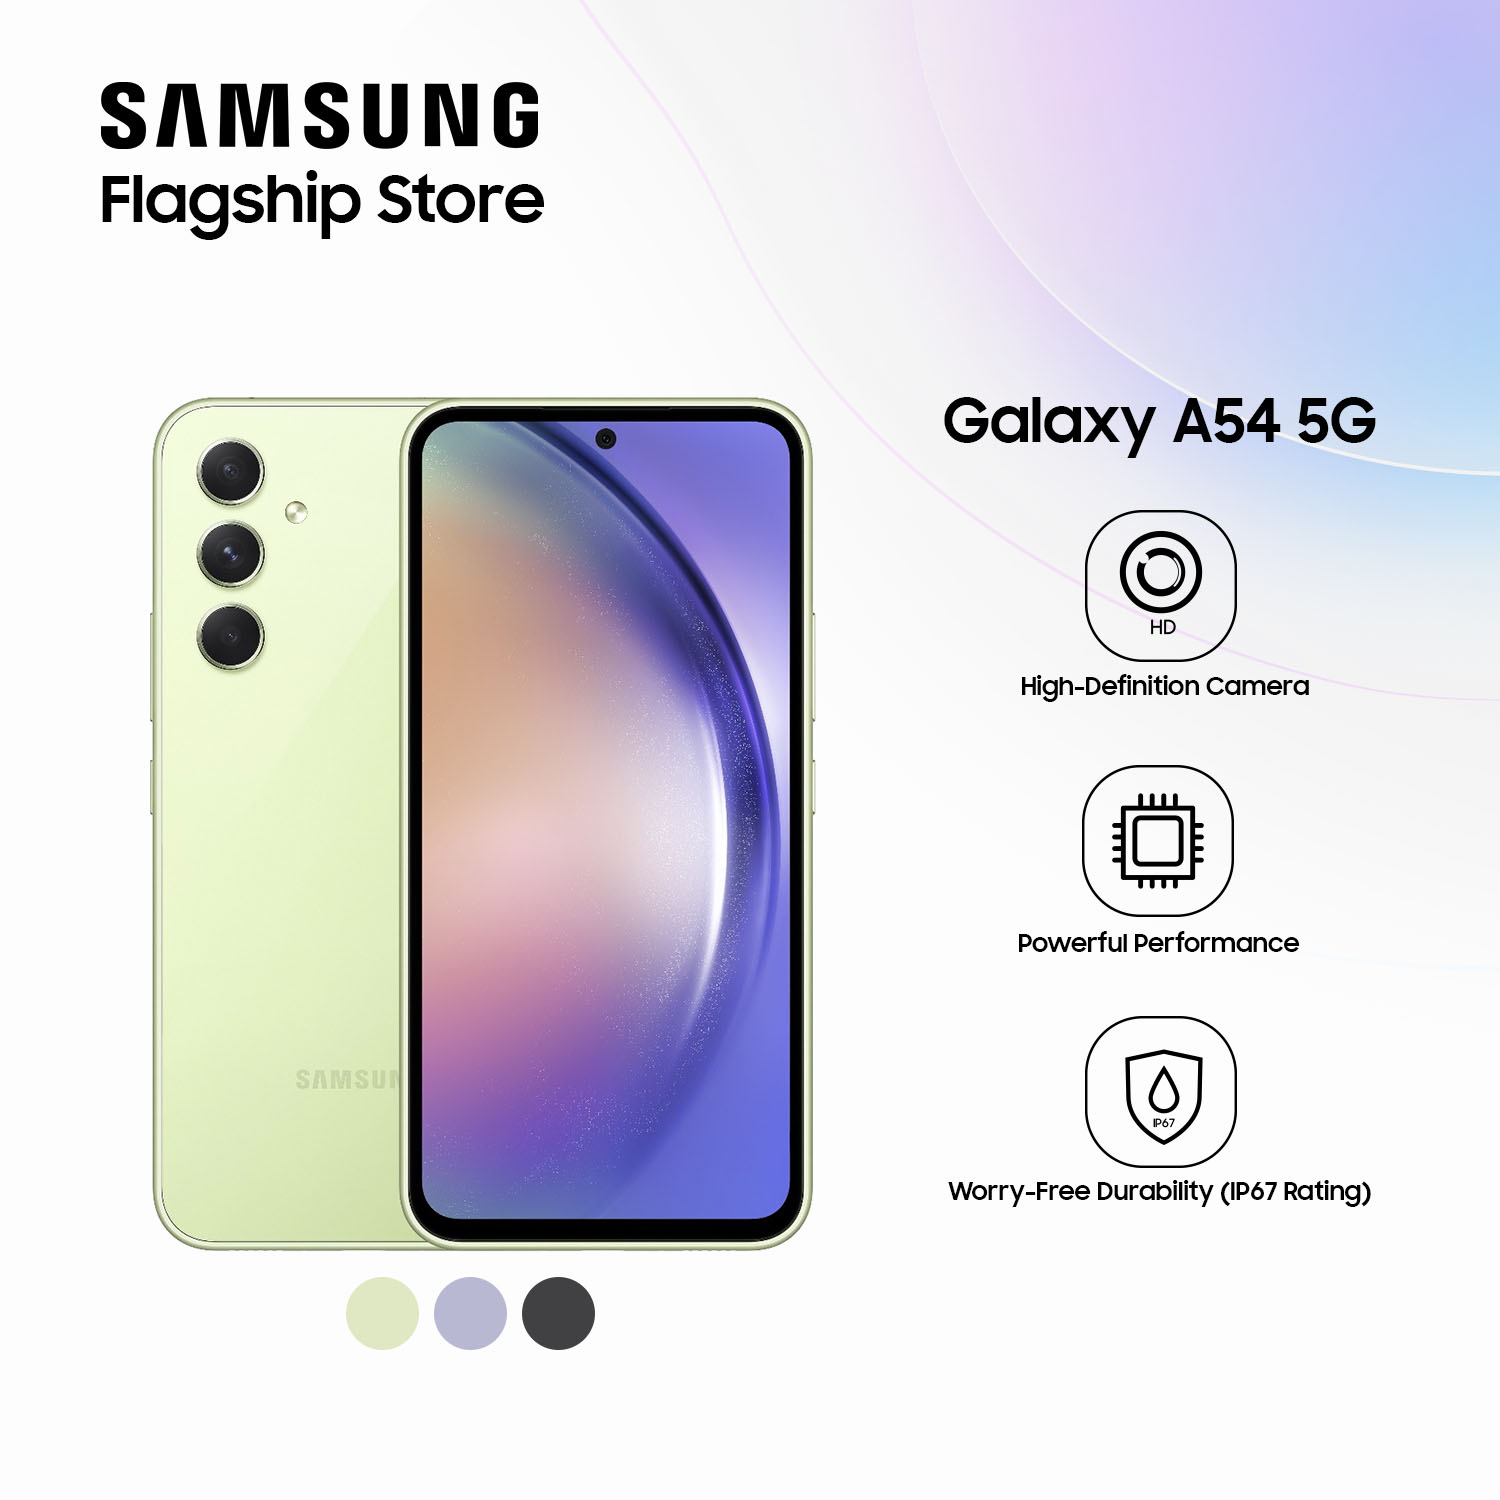 SAMSUNG Galaxy A54 5G A Series Cell Phone, Unlocked Android Smartphone,  128GB, 6.4” Fluid Display Screen, Pro Grade Camera, Long Battery Life,  Refined